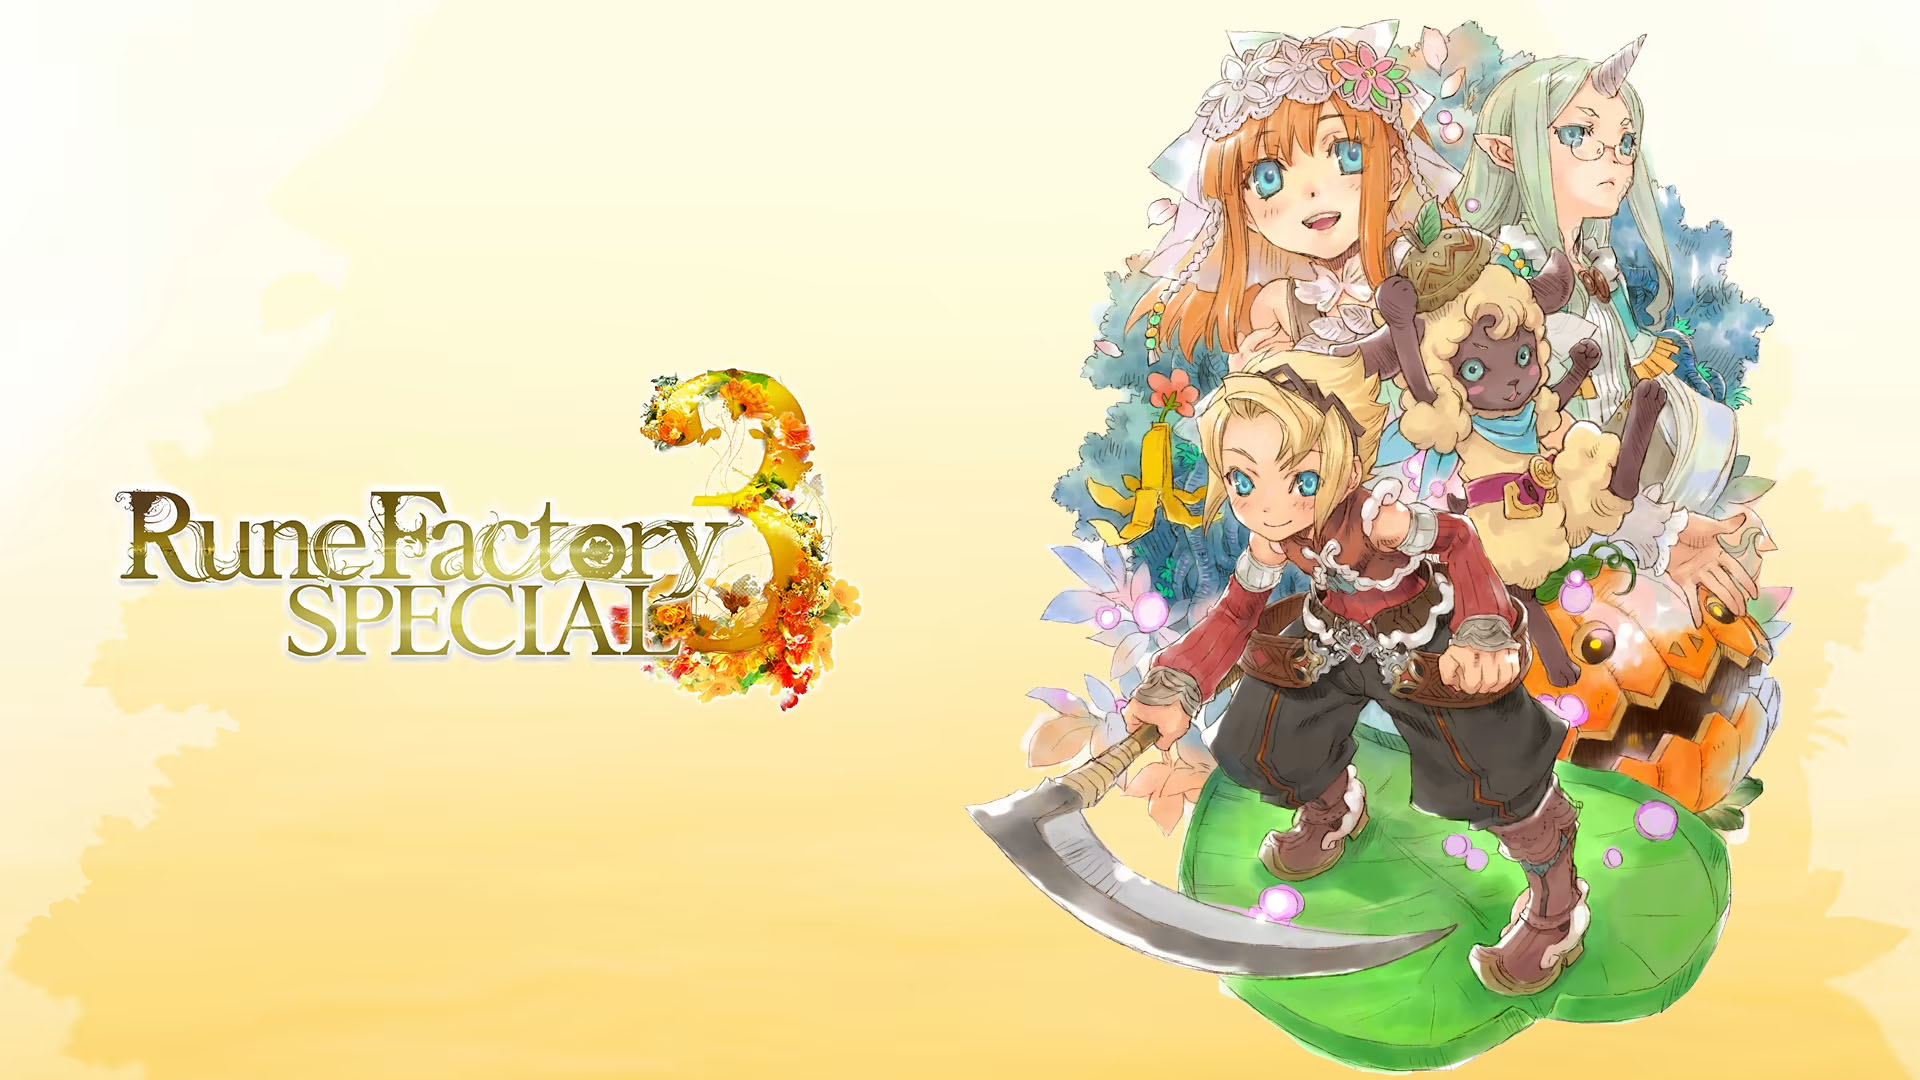 Rune Factory 3 Special announced for Switch